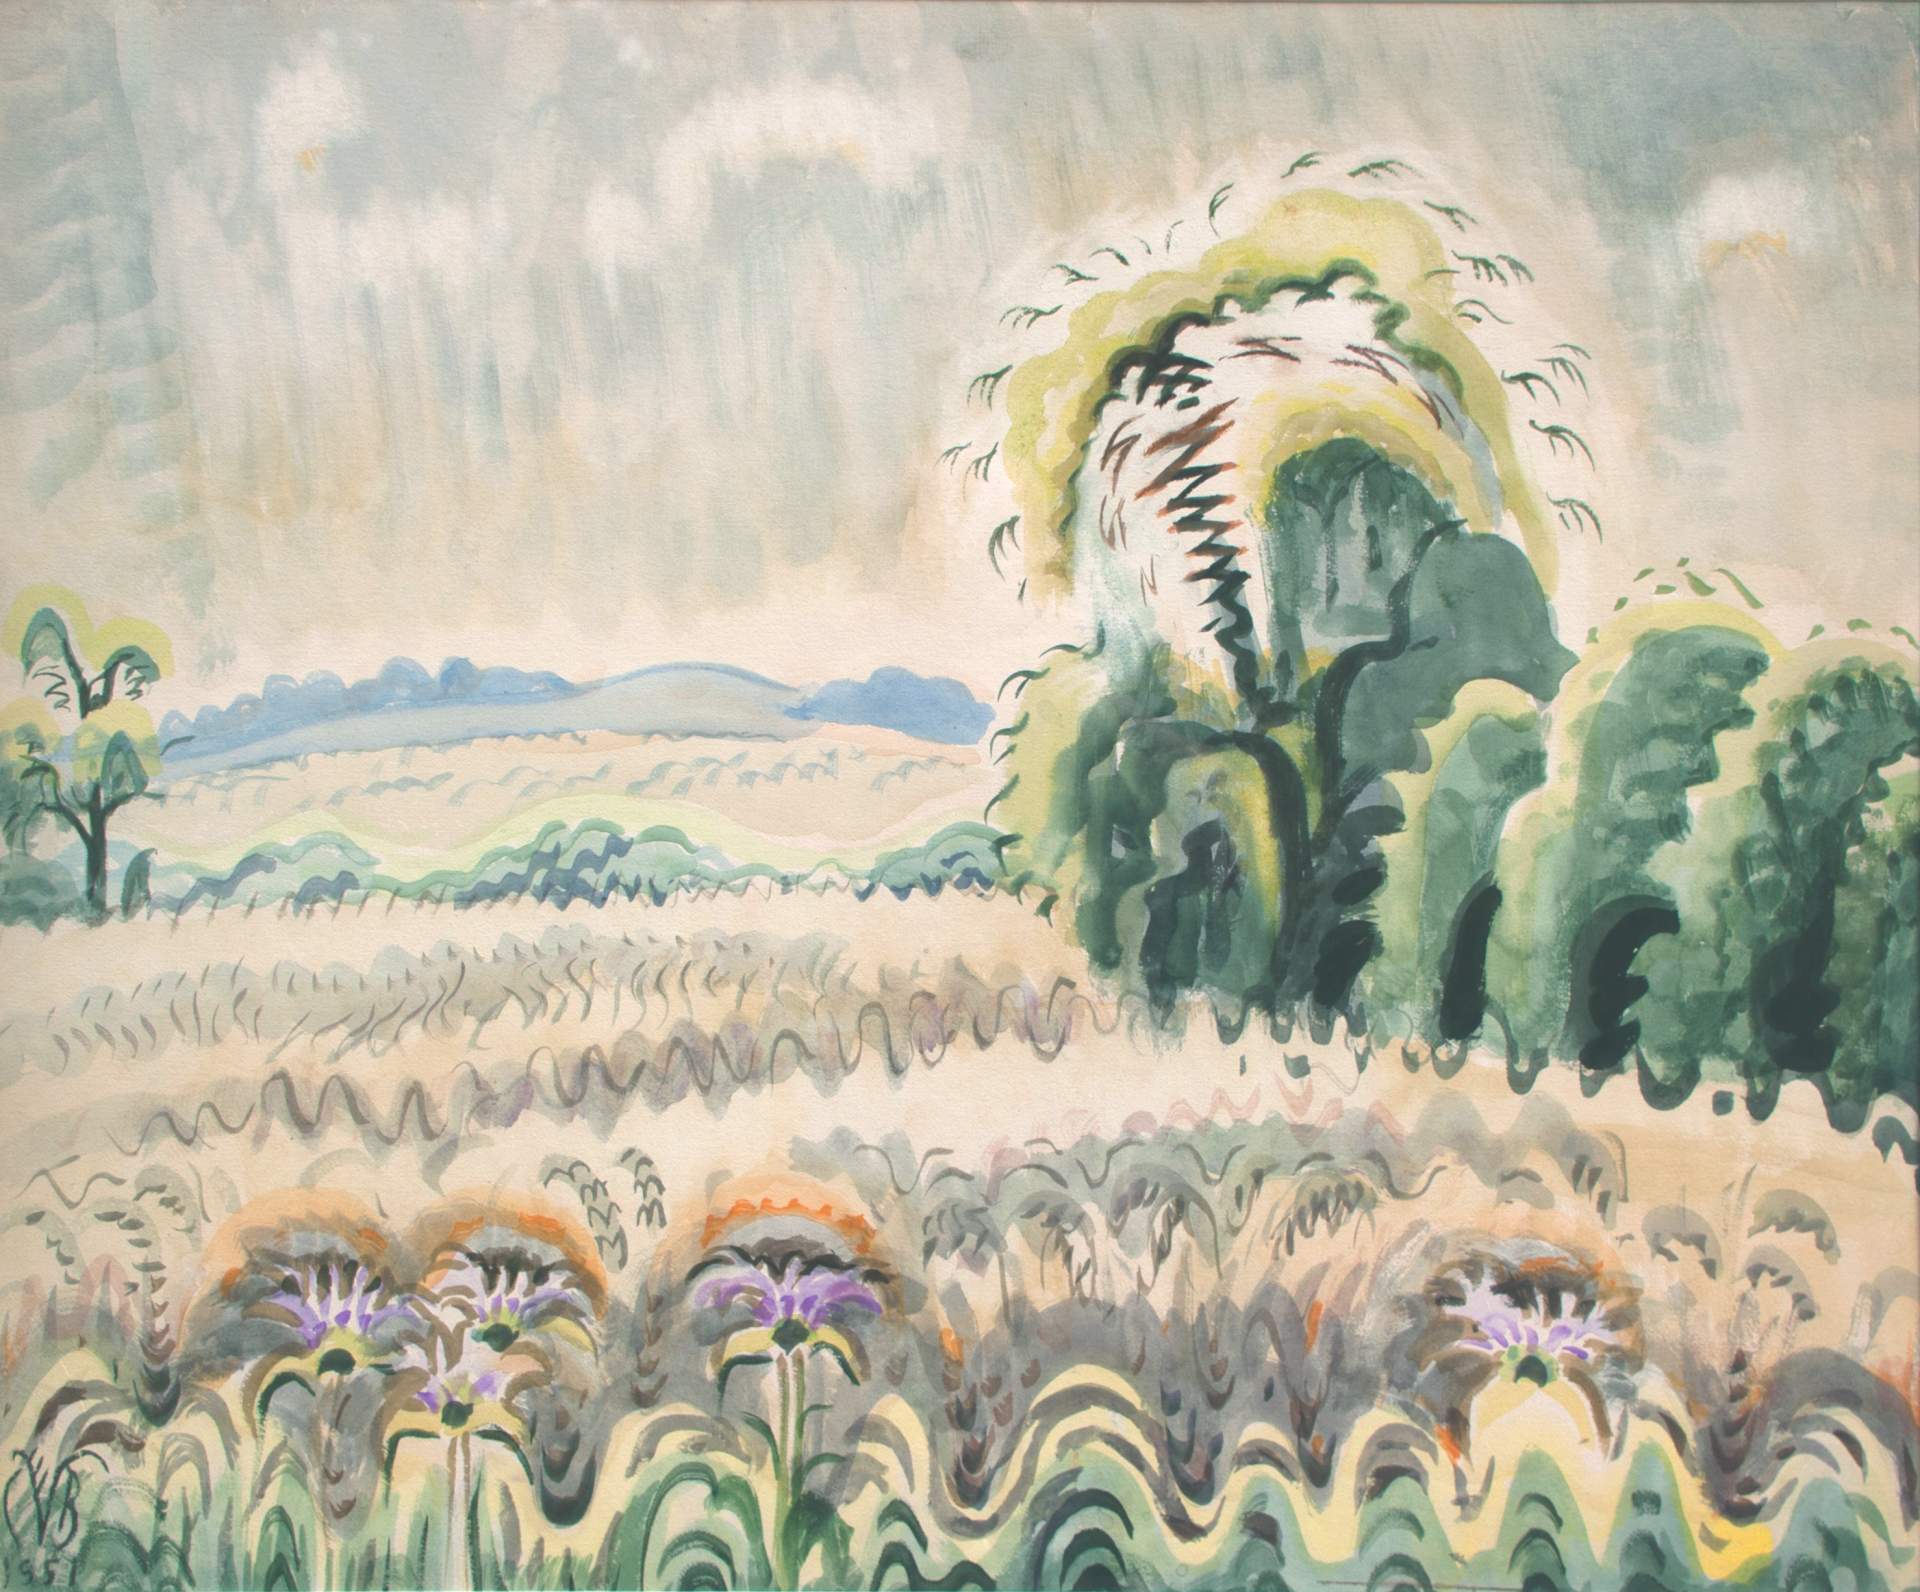 Sweetheart Sketching: Fall in love with Charles Burchfield All Over Again